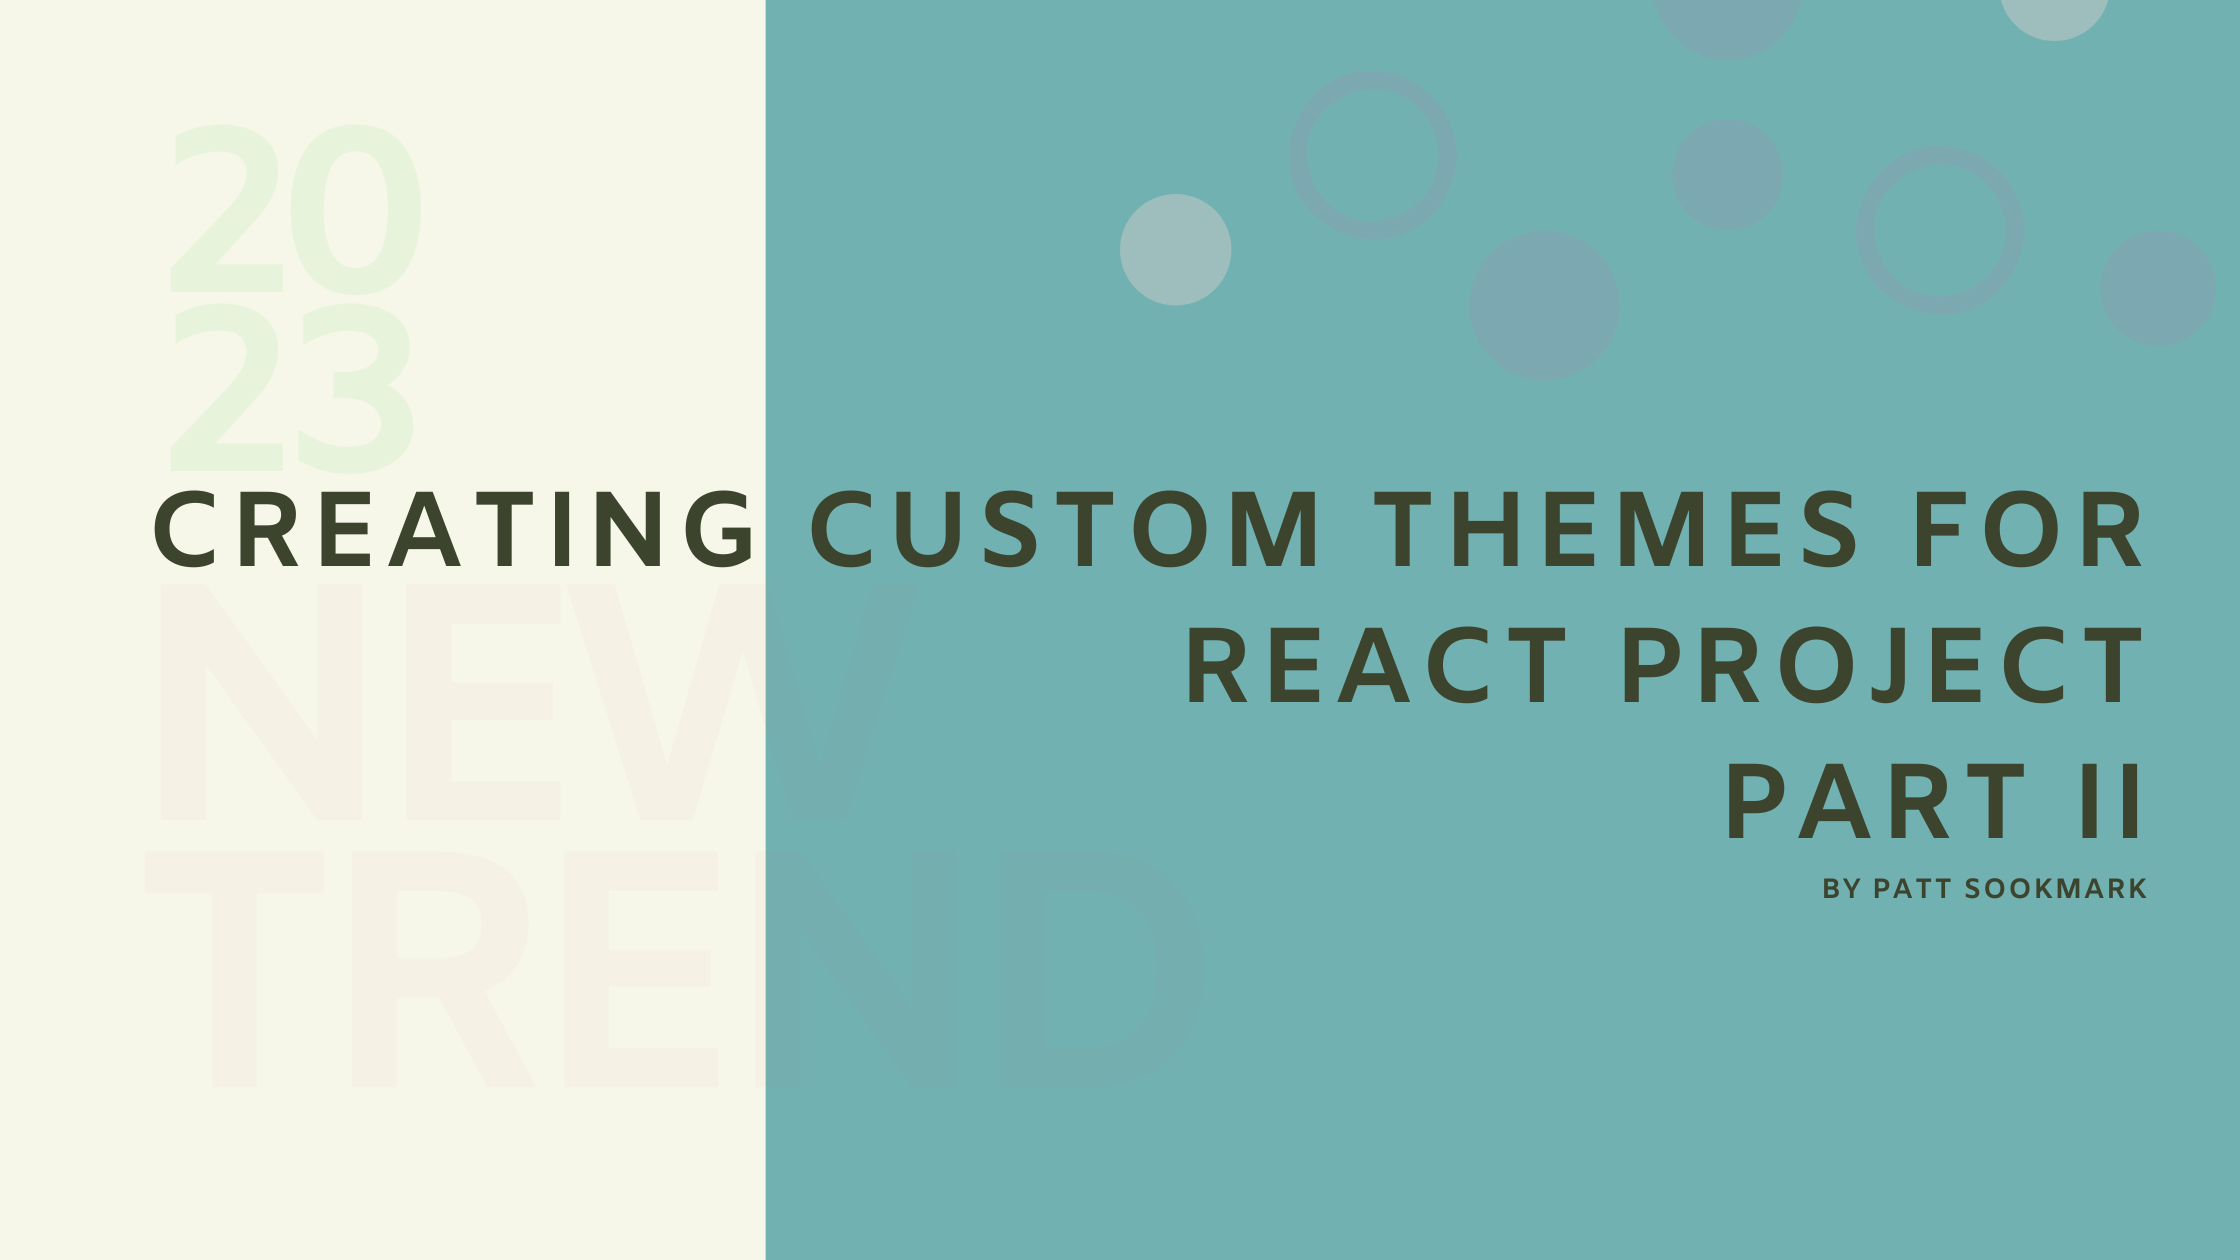 Creating custom themes for React project part II